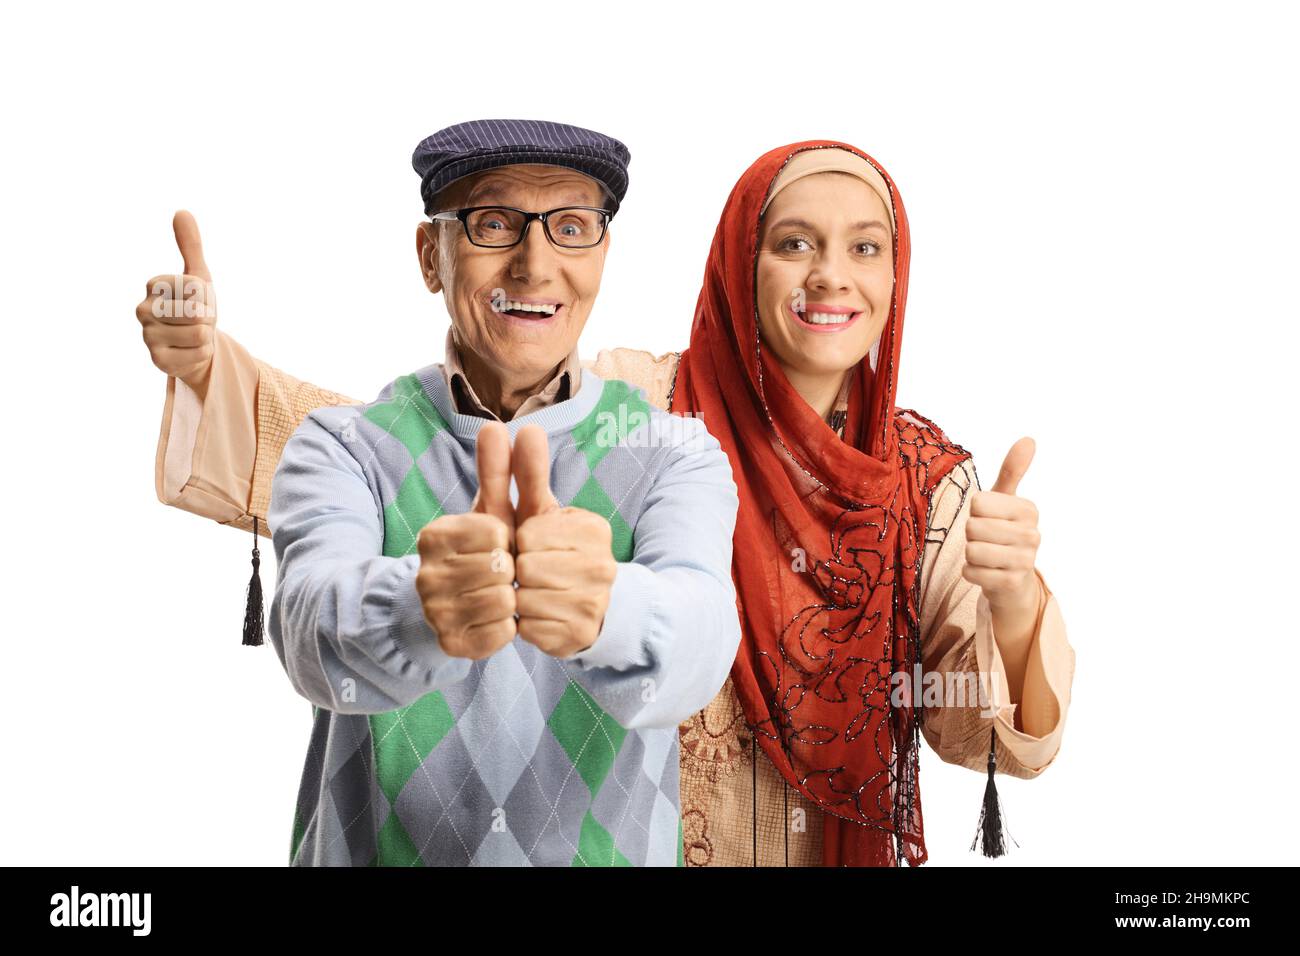 Elderly man gesturing thumbs up with a young arab woman behind isolated on white background Stock Photo